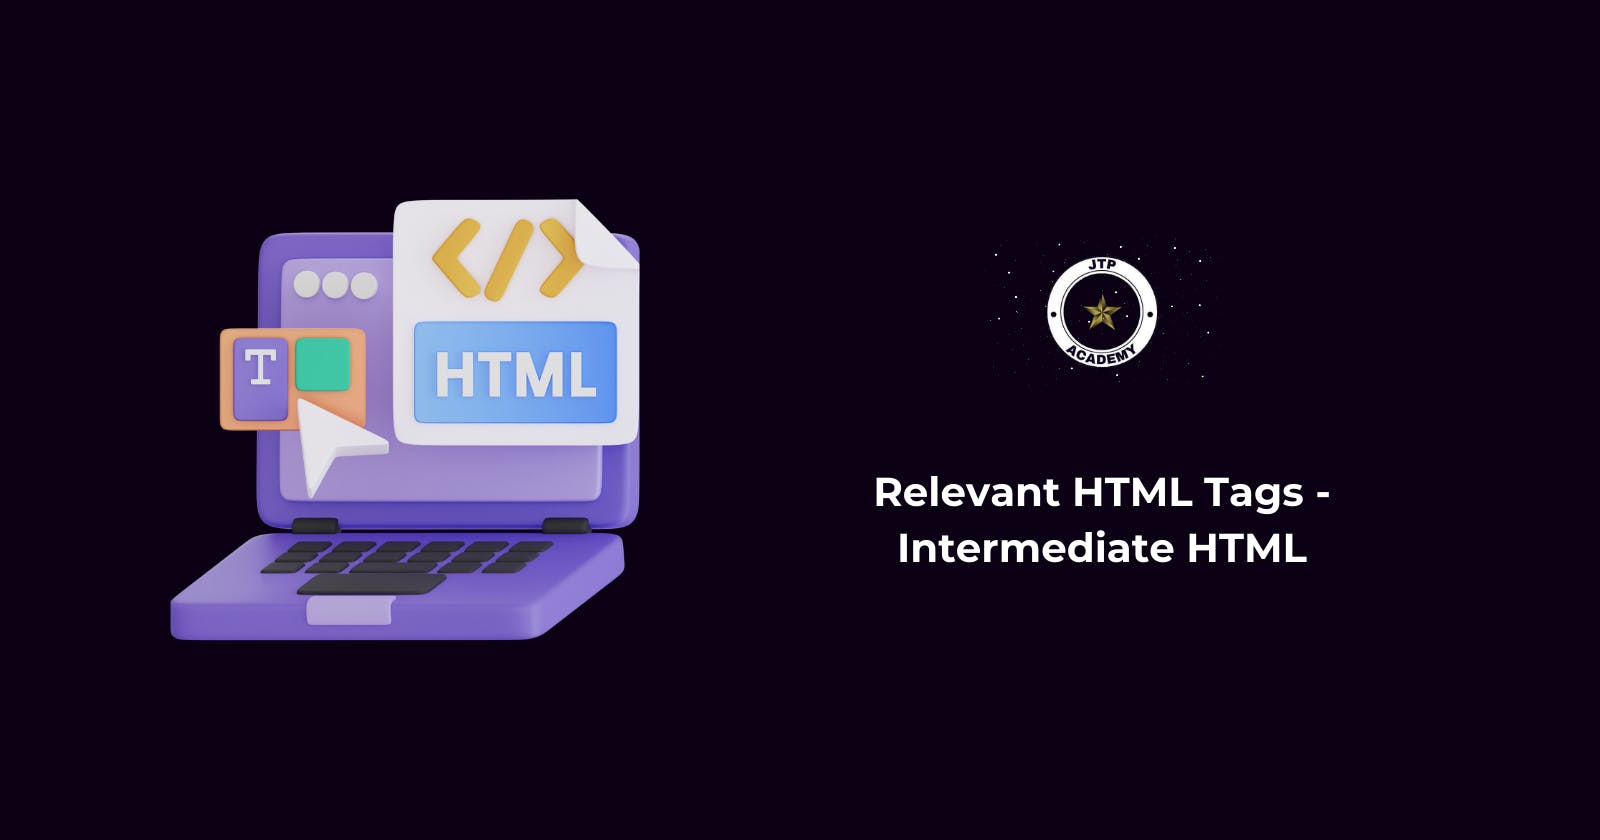 More Relevant HTML Tags - Intermediate HTML